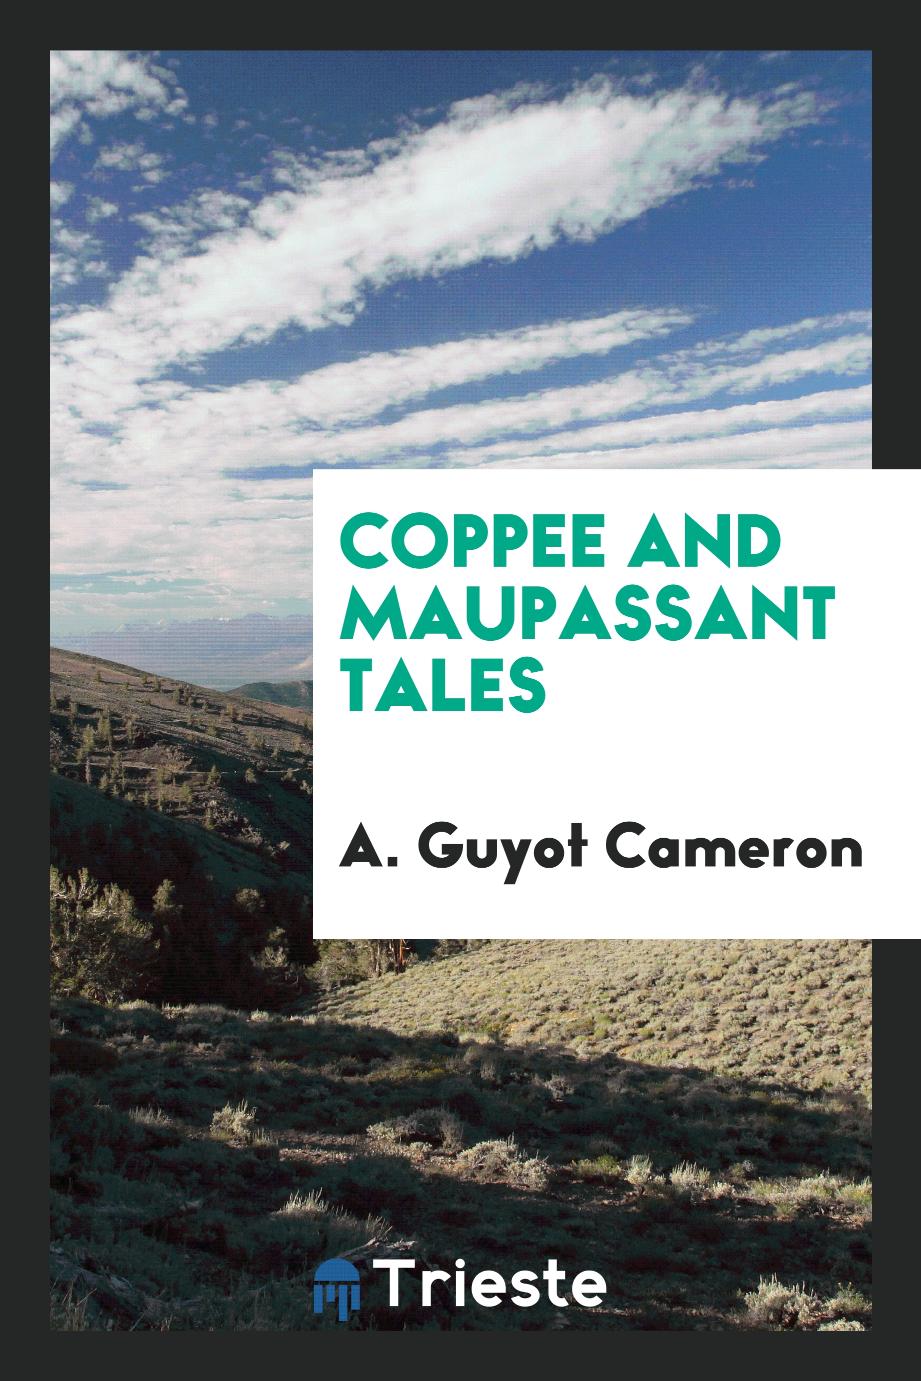 Coppee and Maupassant tales